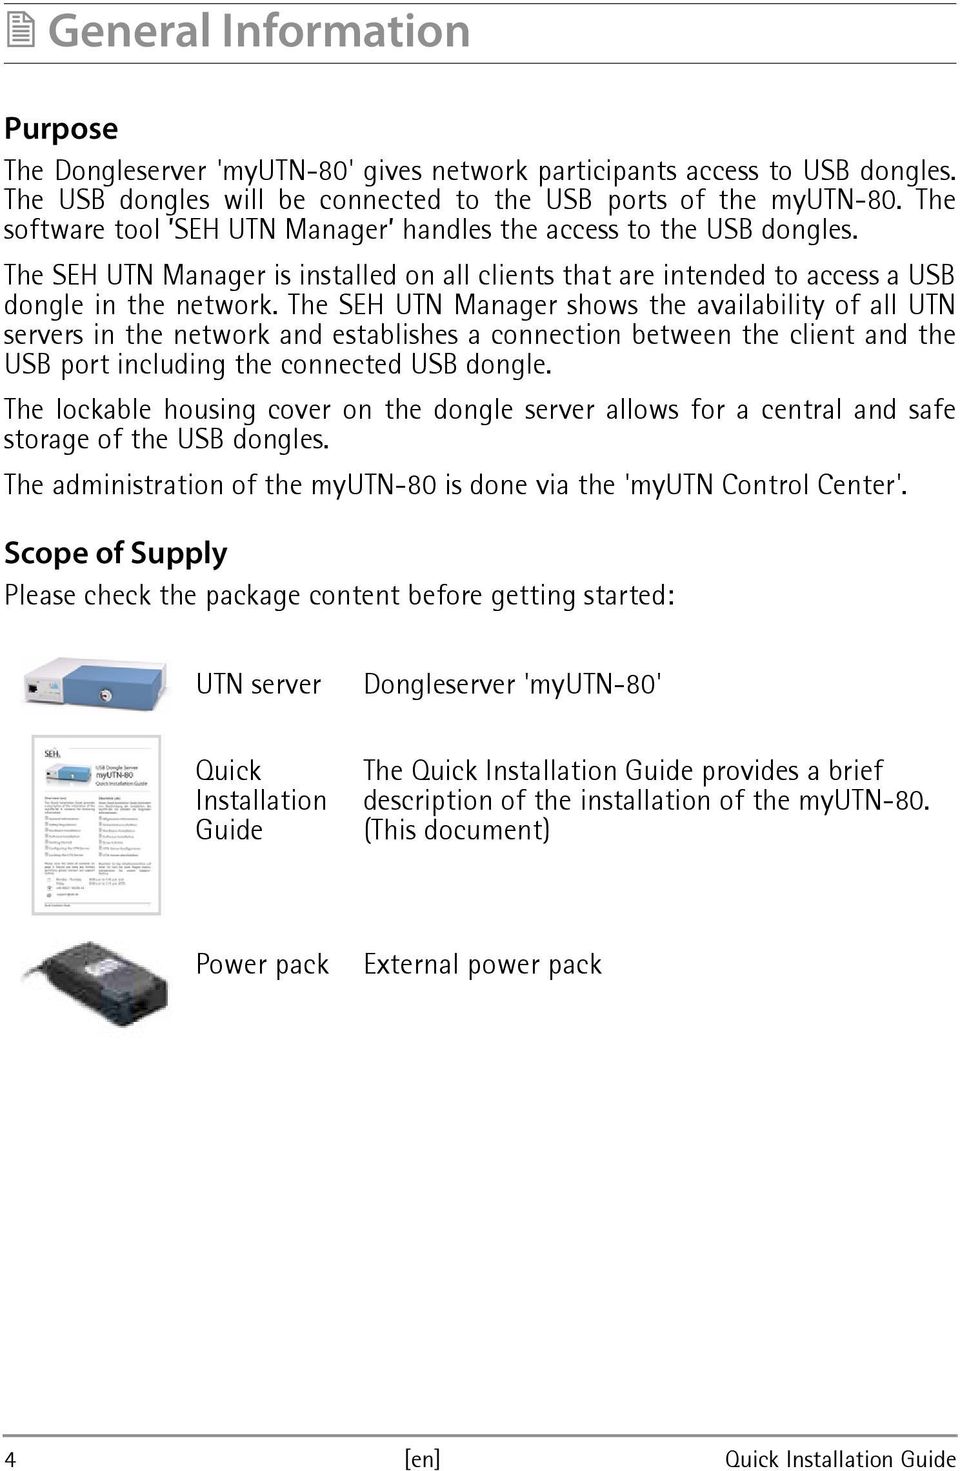 The SEH UTN Manager shows the availability of all UTN servers in the network and establishes a connection between the client and the USB port including the connected USB dongle.